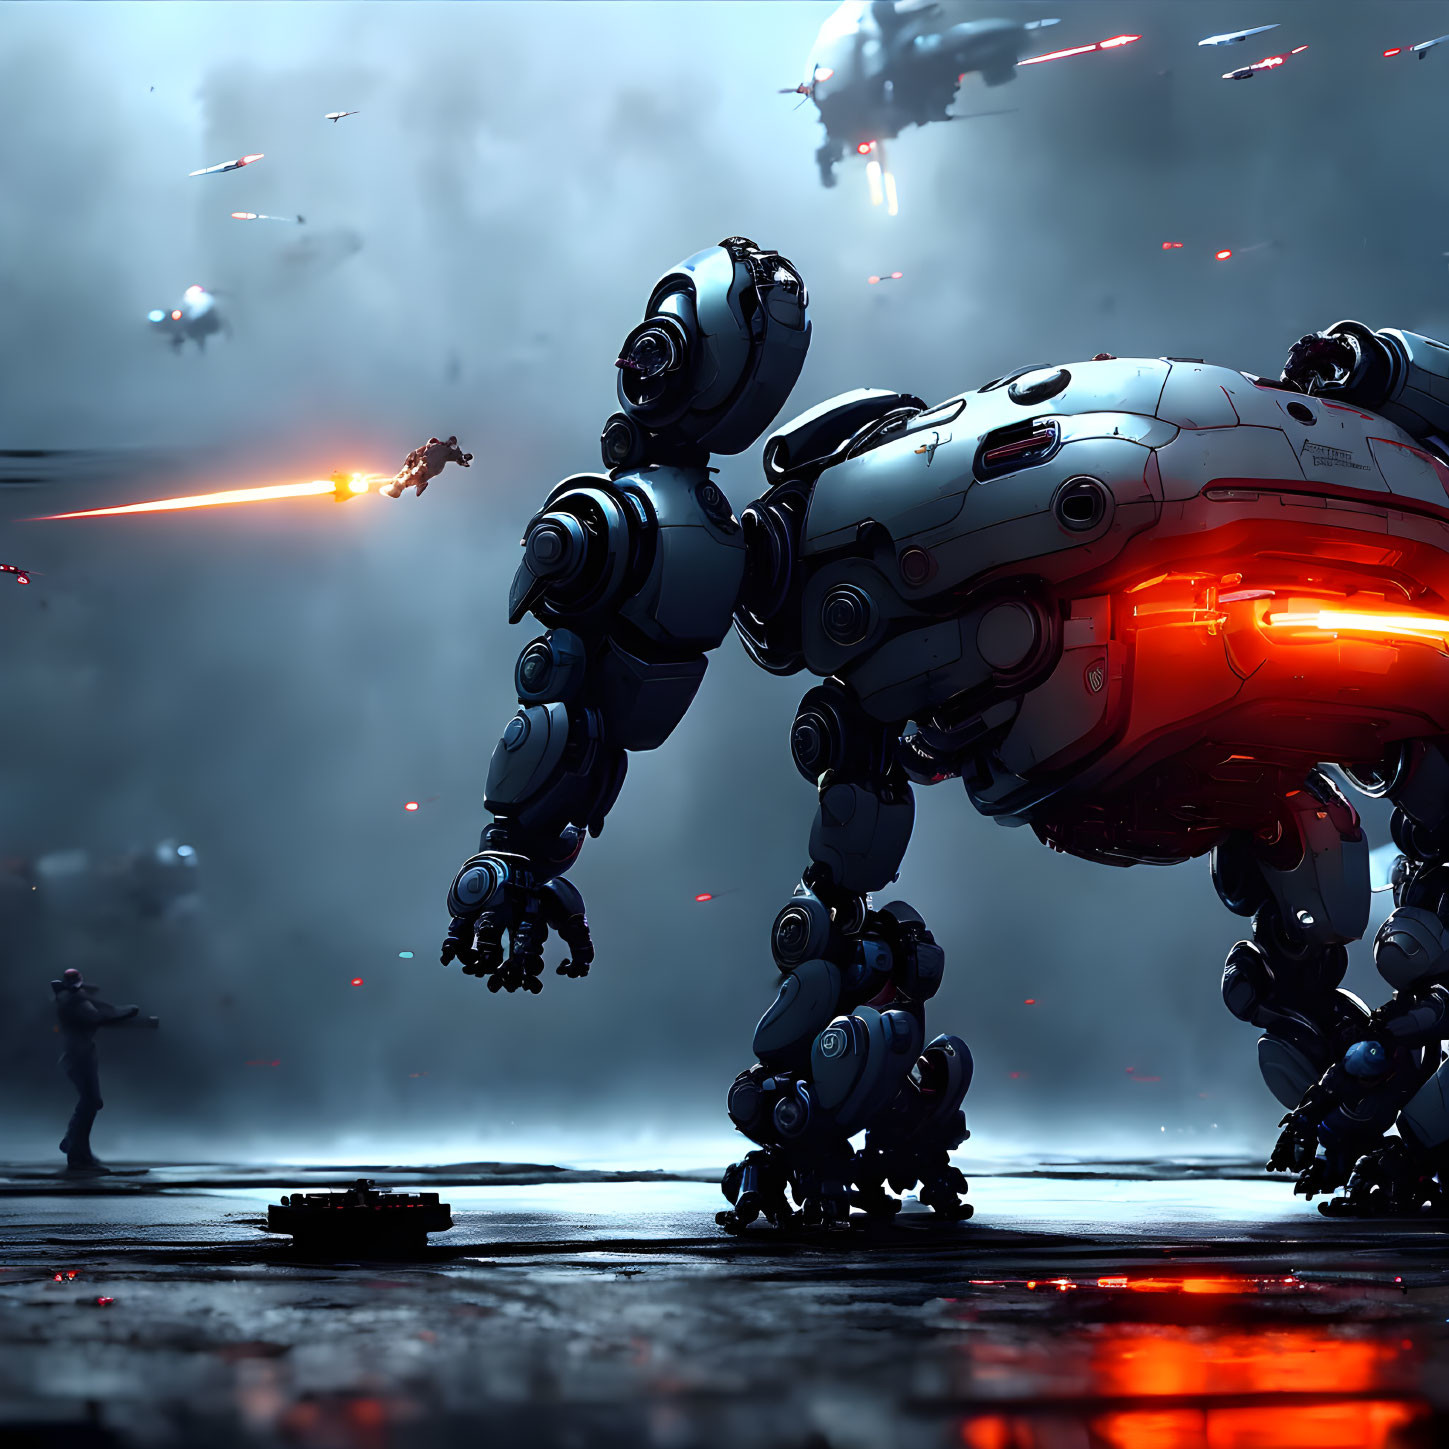 Bipedal robot in battle scene with flying drones and soldier in dystopian setting